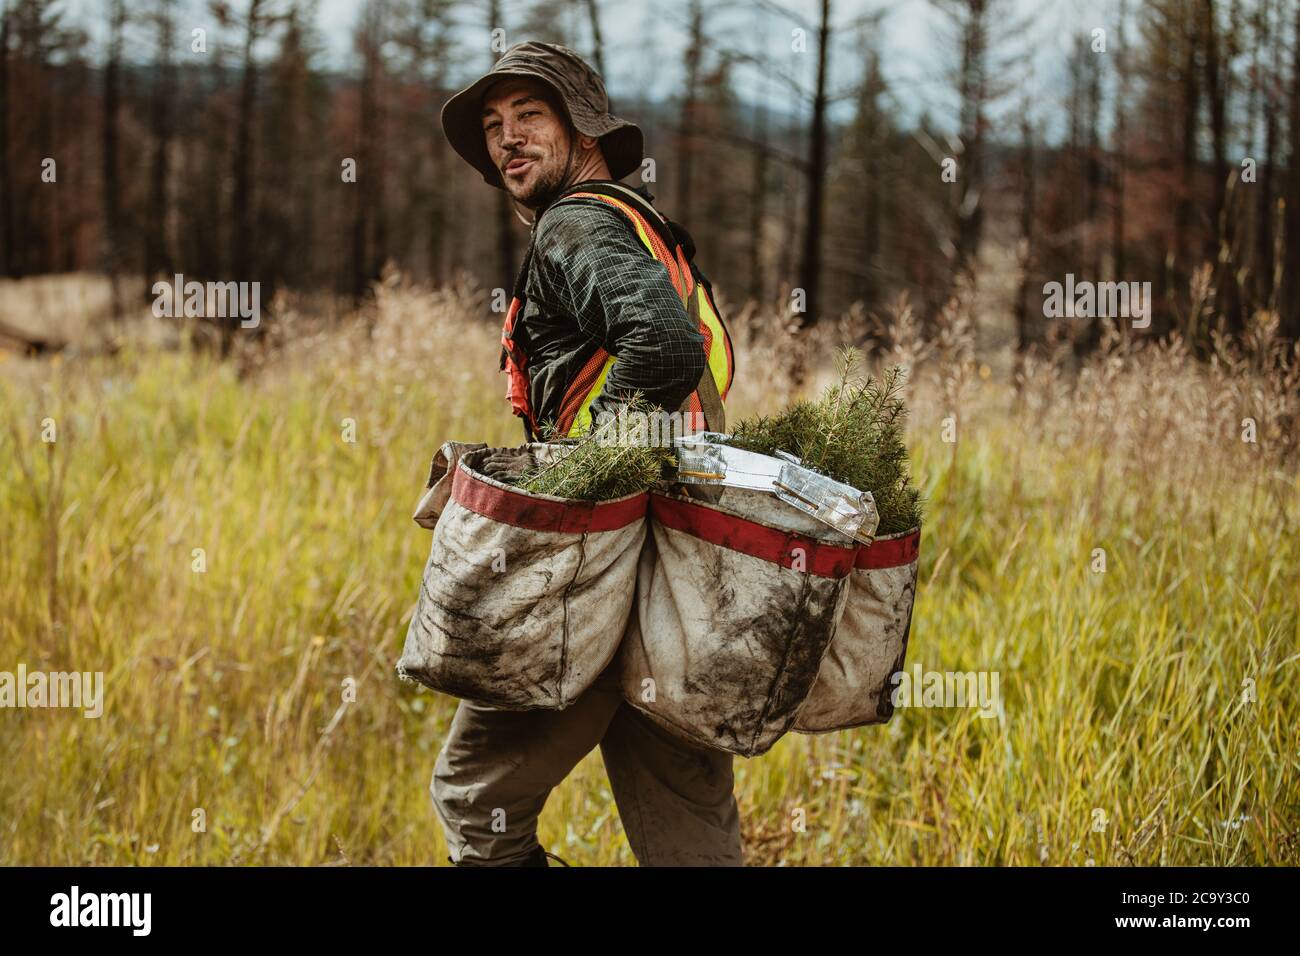 Forester walking through the forest carrying bag full of trees. Man working in forestry looking over shoulder at camera and smiling. Stock Photo